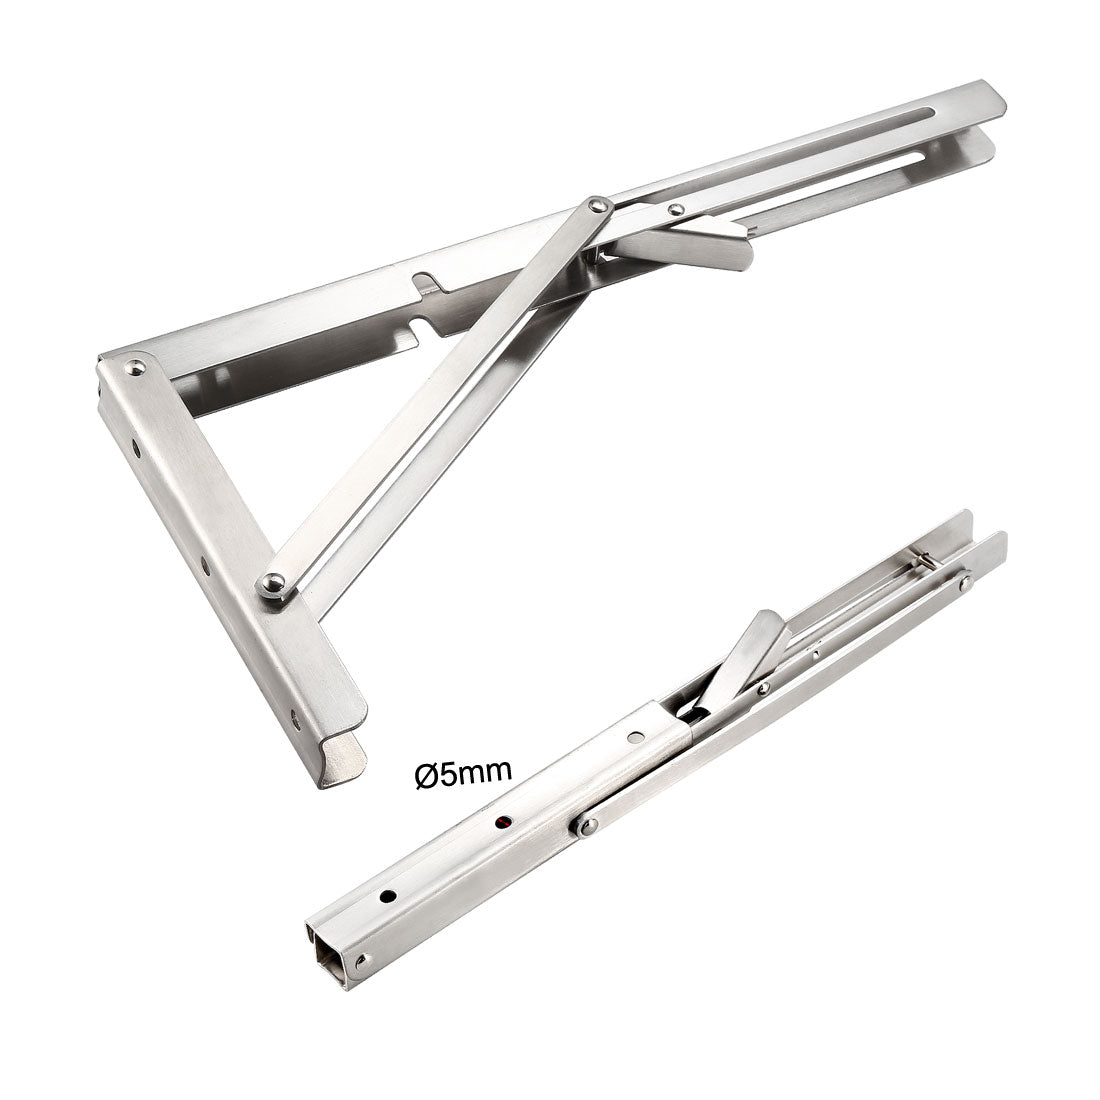 uxcell Uxcell Folding Bracket 14 inch 350mm for Shelf Table Desk Wall Mounted Support Collapsible Long Release Arm Space Saving Stainless Steel